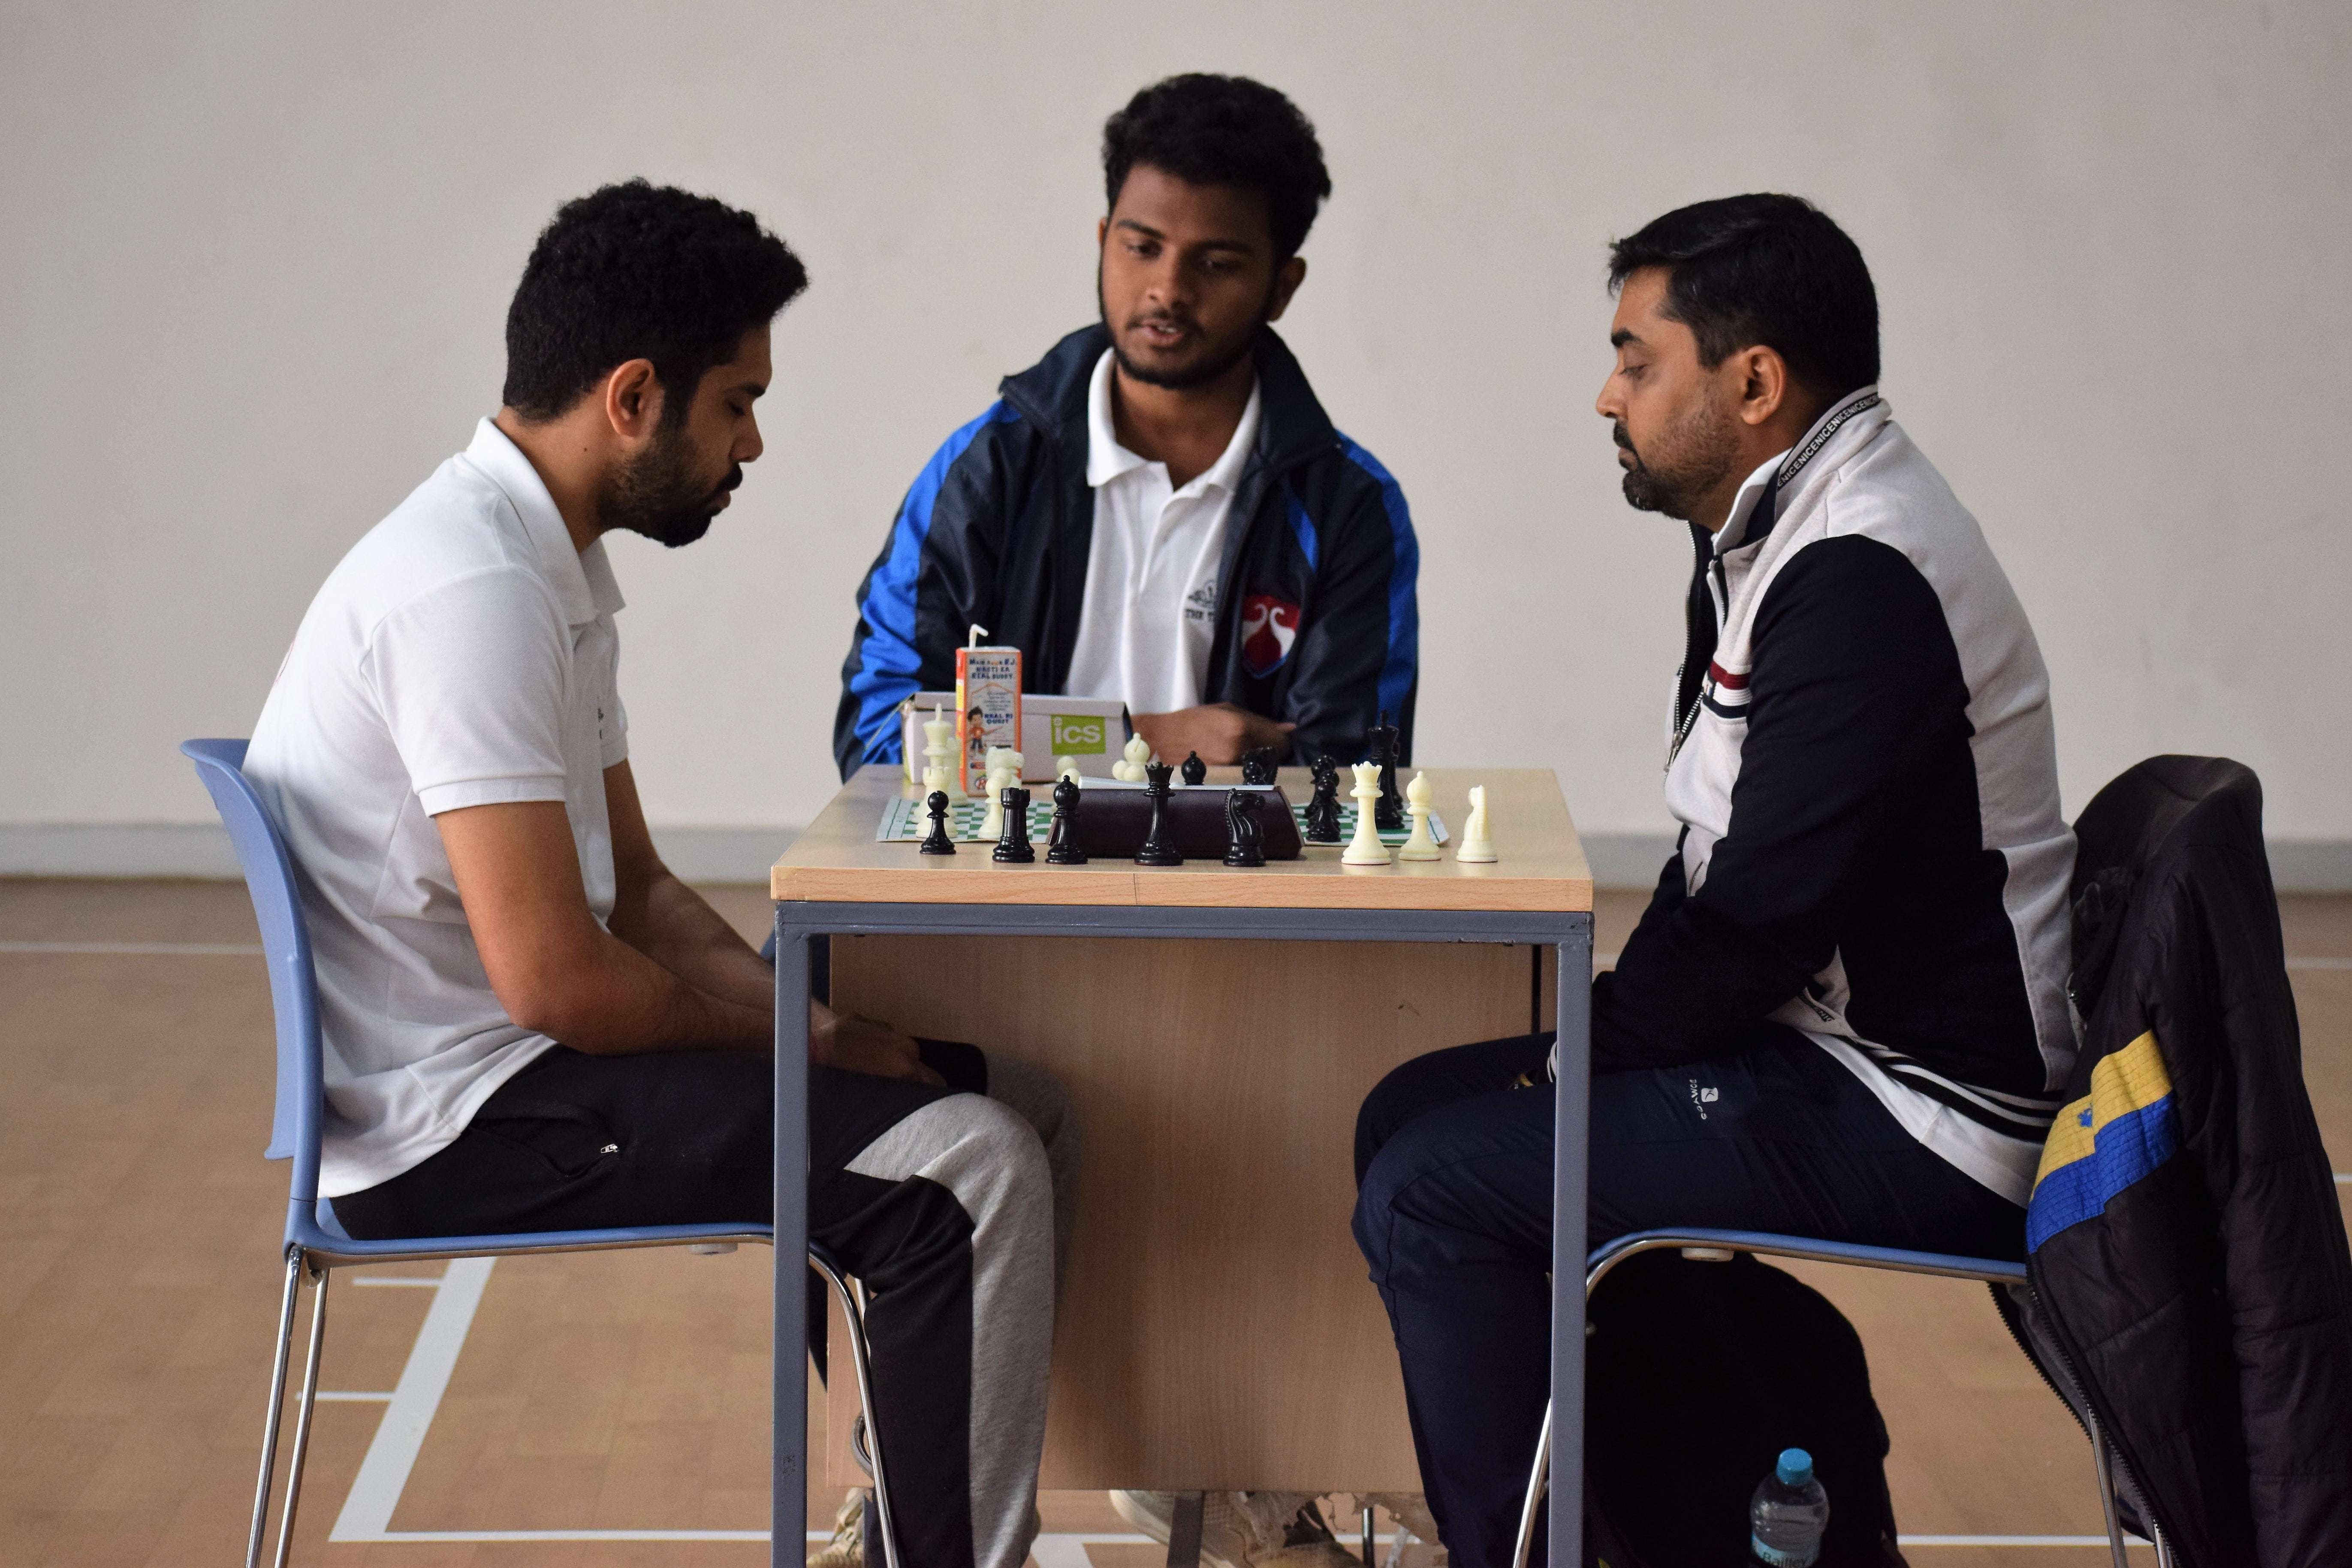 The final round of the chess tournament was intensely contested between Aman Dalal (TIL) and Yashpal Sharma (BCCL). The umpire in the middle looks on